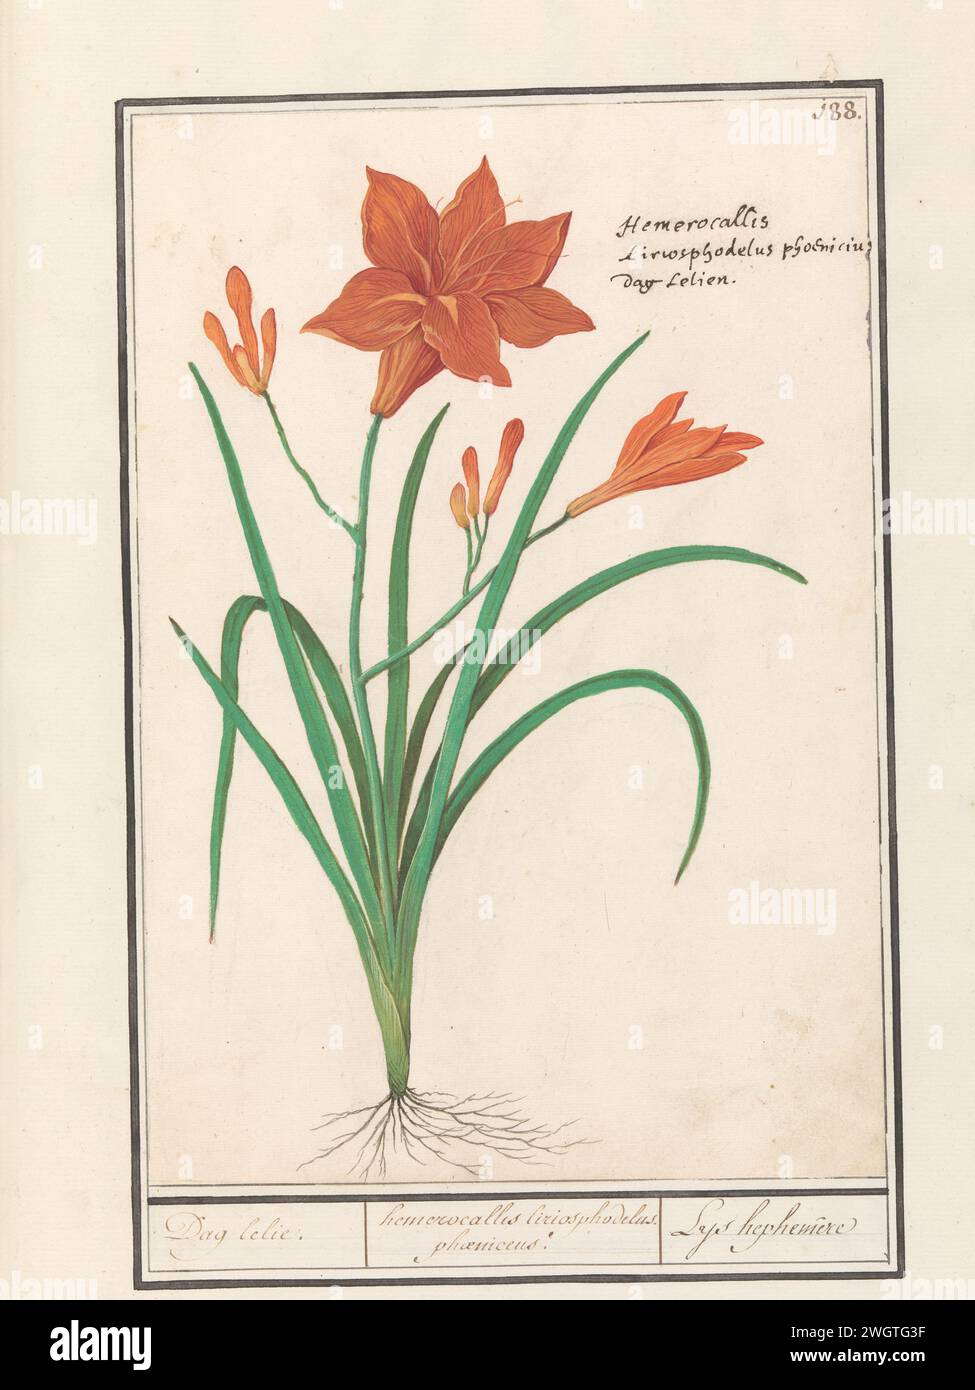 Orange daylily (hemerocallis), Anselmus Boëtius de Boodt, 1596 - 1610 drawing Oranje Daglelie. Numbered at the top right: 188. On the right the Latin and Dutch name. Part of the second album with drawings of flowers and plants. Ninth of twelve albums with drawings of animals, birds and plants known around 1600, made commissioned by Emperor Rudolf II. With explanation in Dutch, Latin and French. draughtsman: Praagdraughtsman: Delft paper. watercolor (paint). deck paint. chalk. ink brush / pen flowers: lily Stock Photo